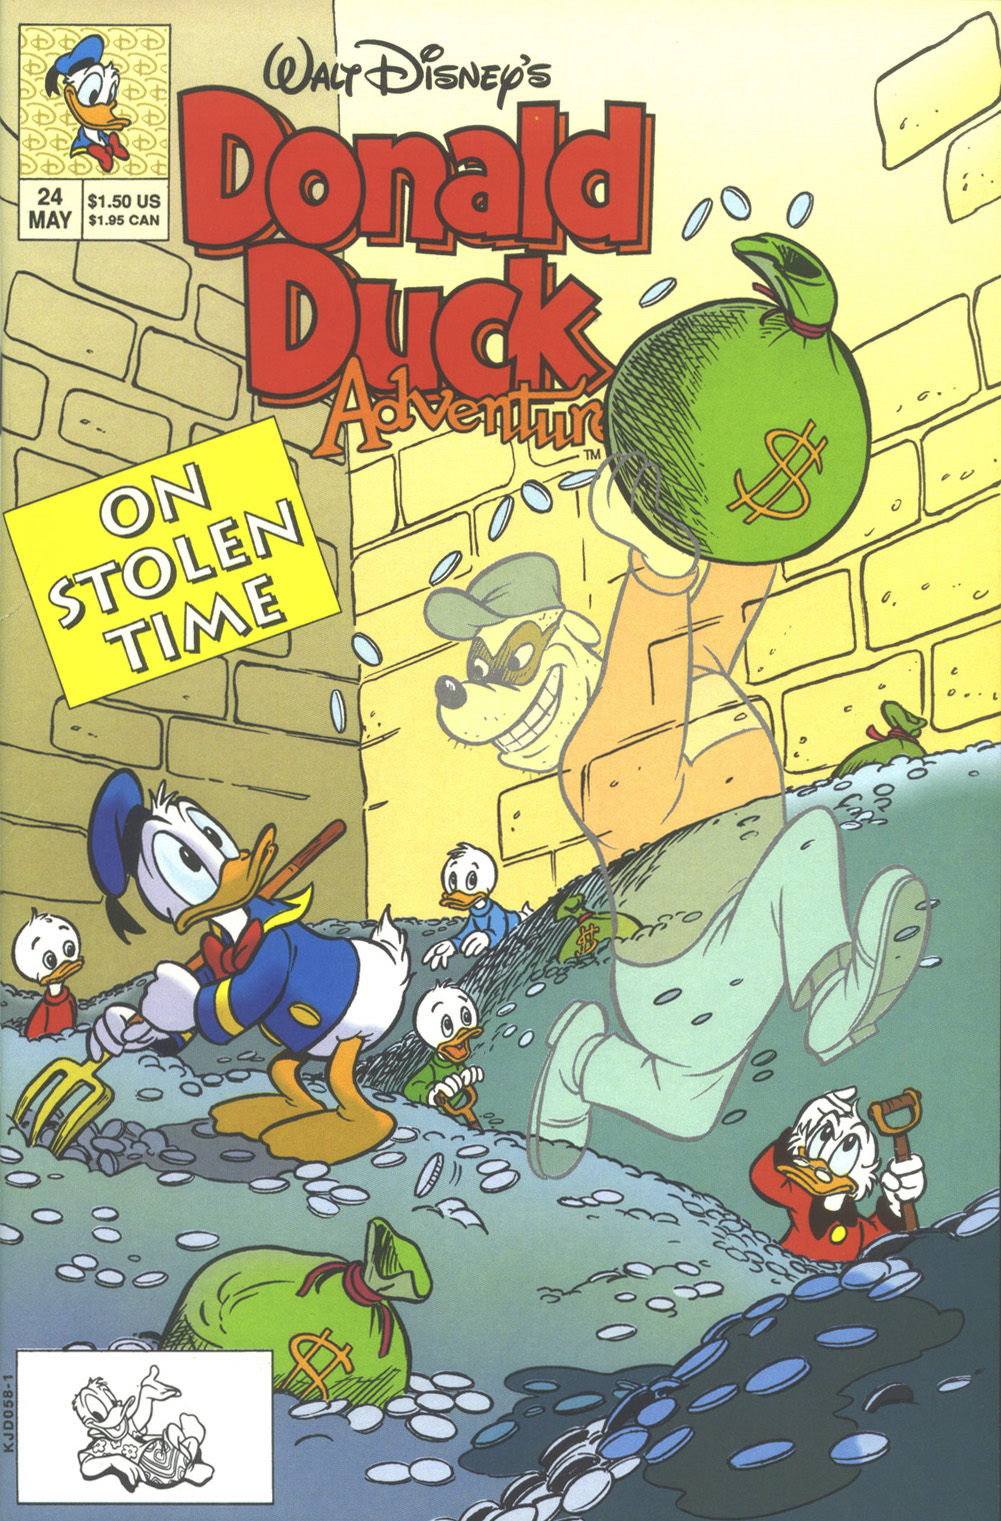 Donald Duck Adventures issue 24 - Page 1